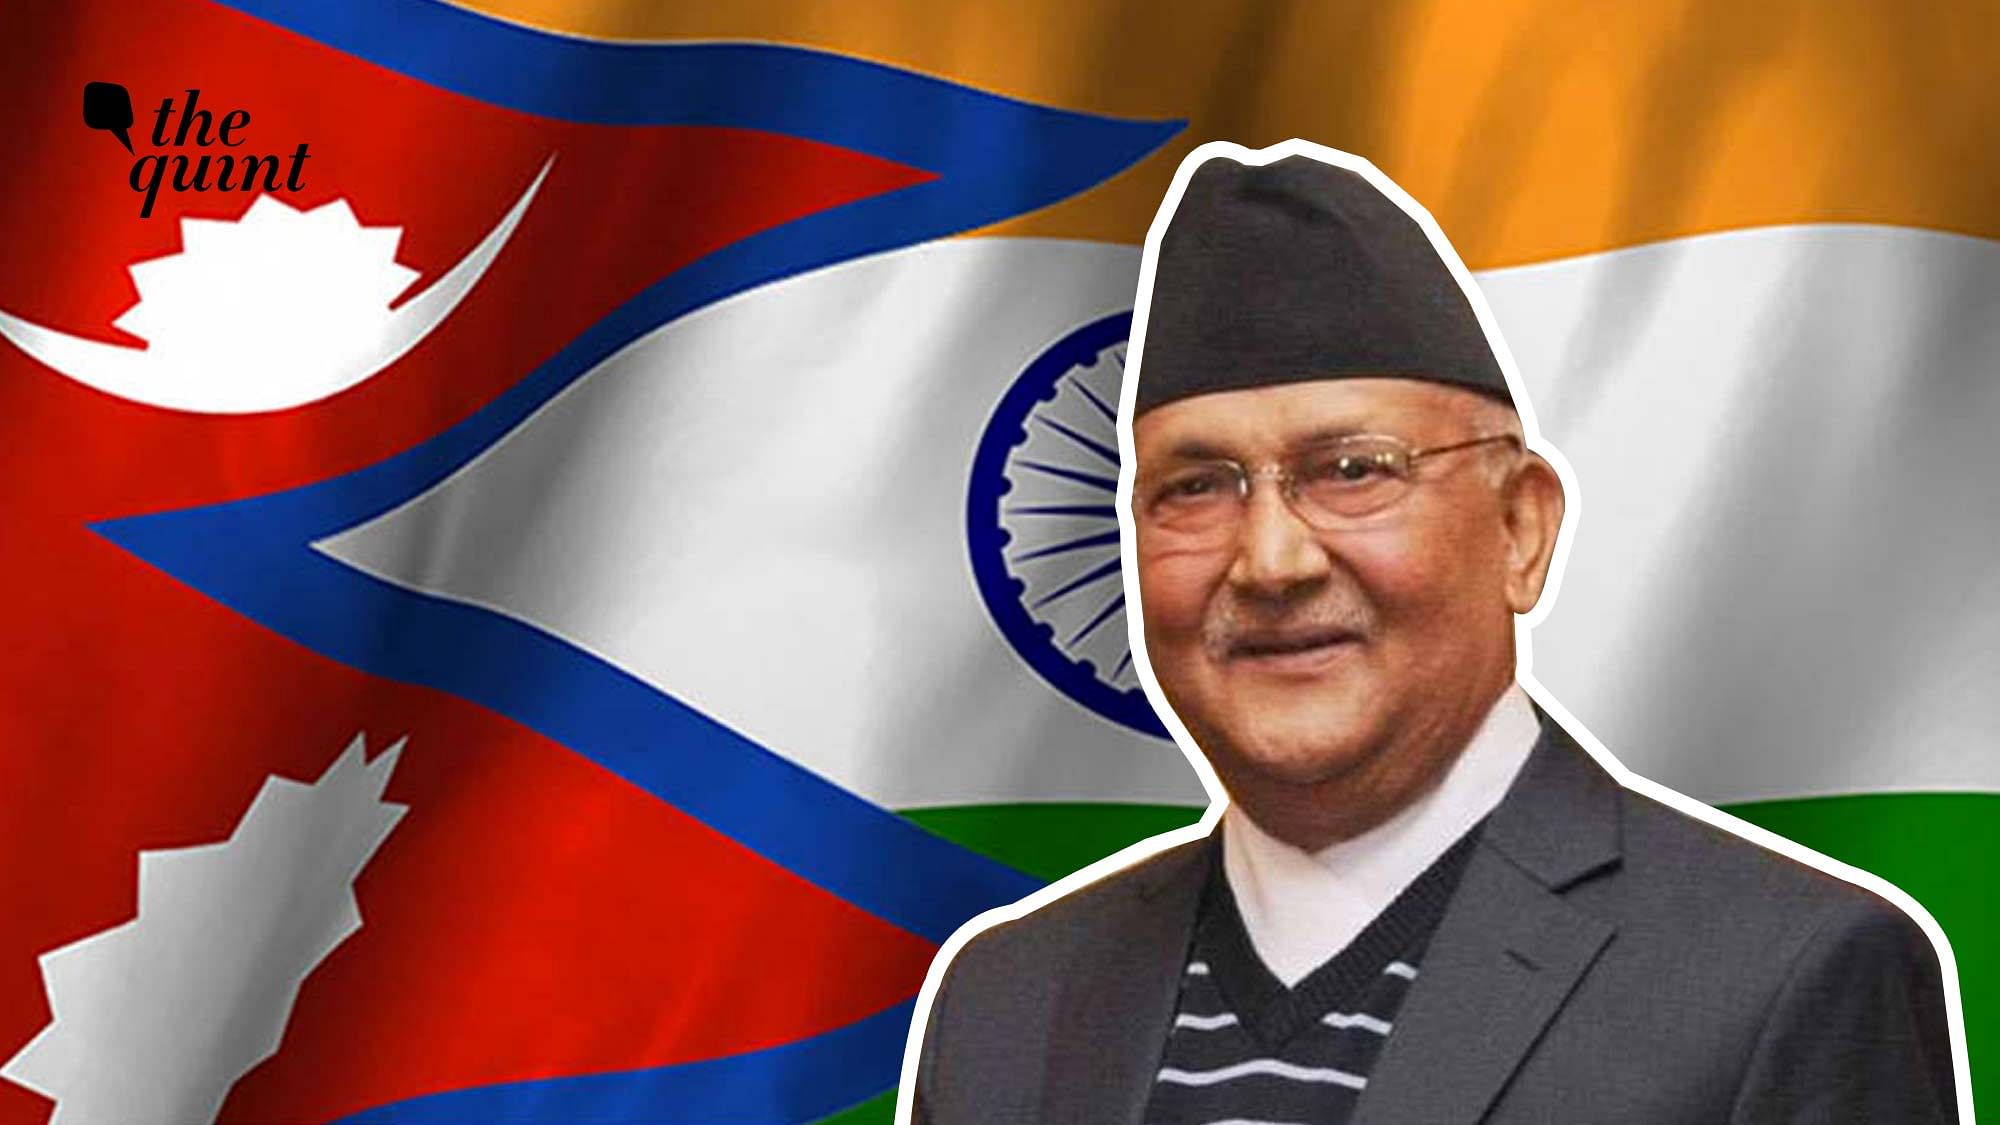 Image of Nepal PM KP Oli, and India and Nepal’s flags, used for representational purposes.